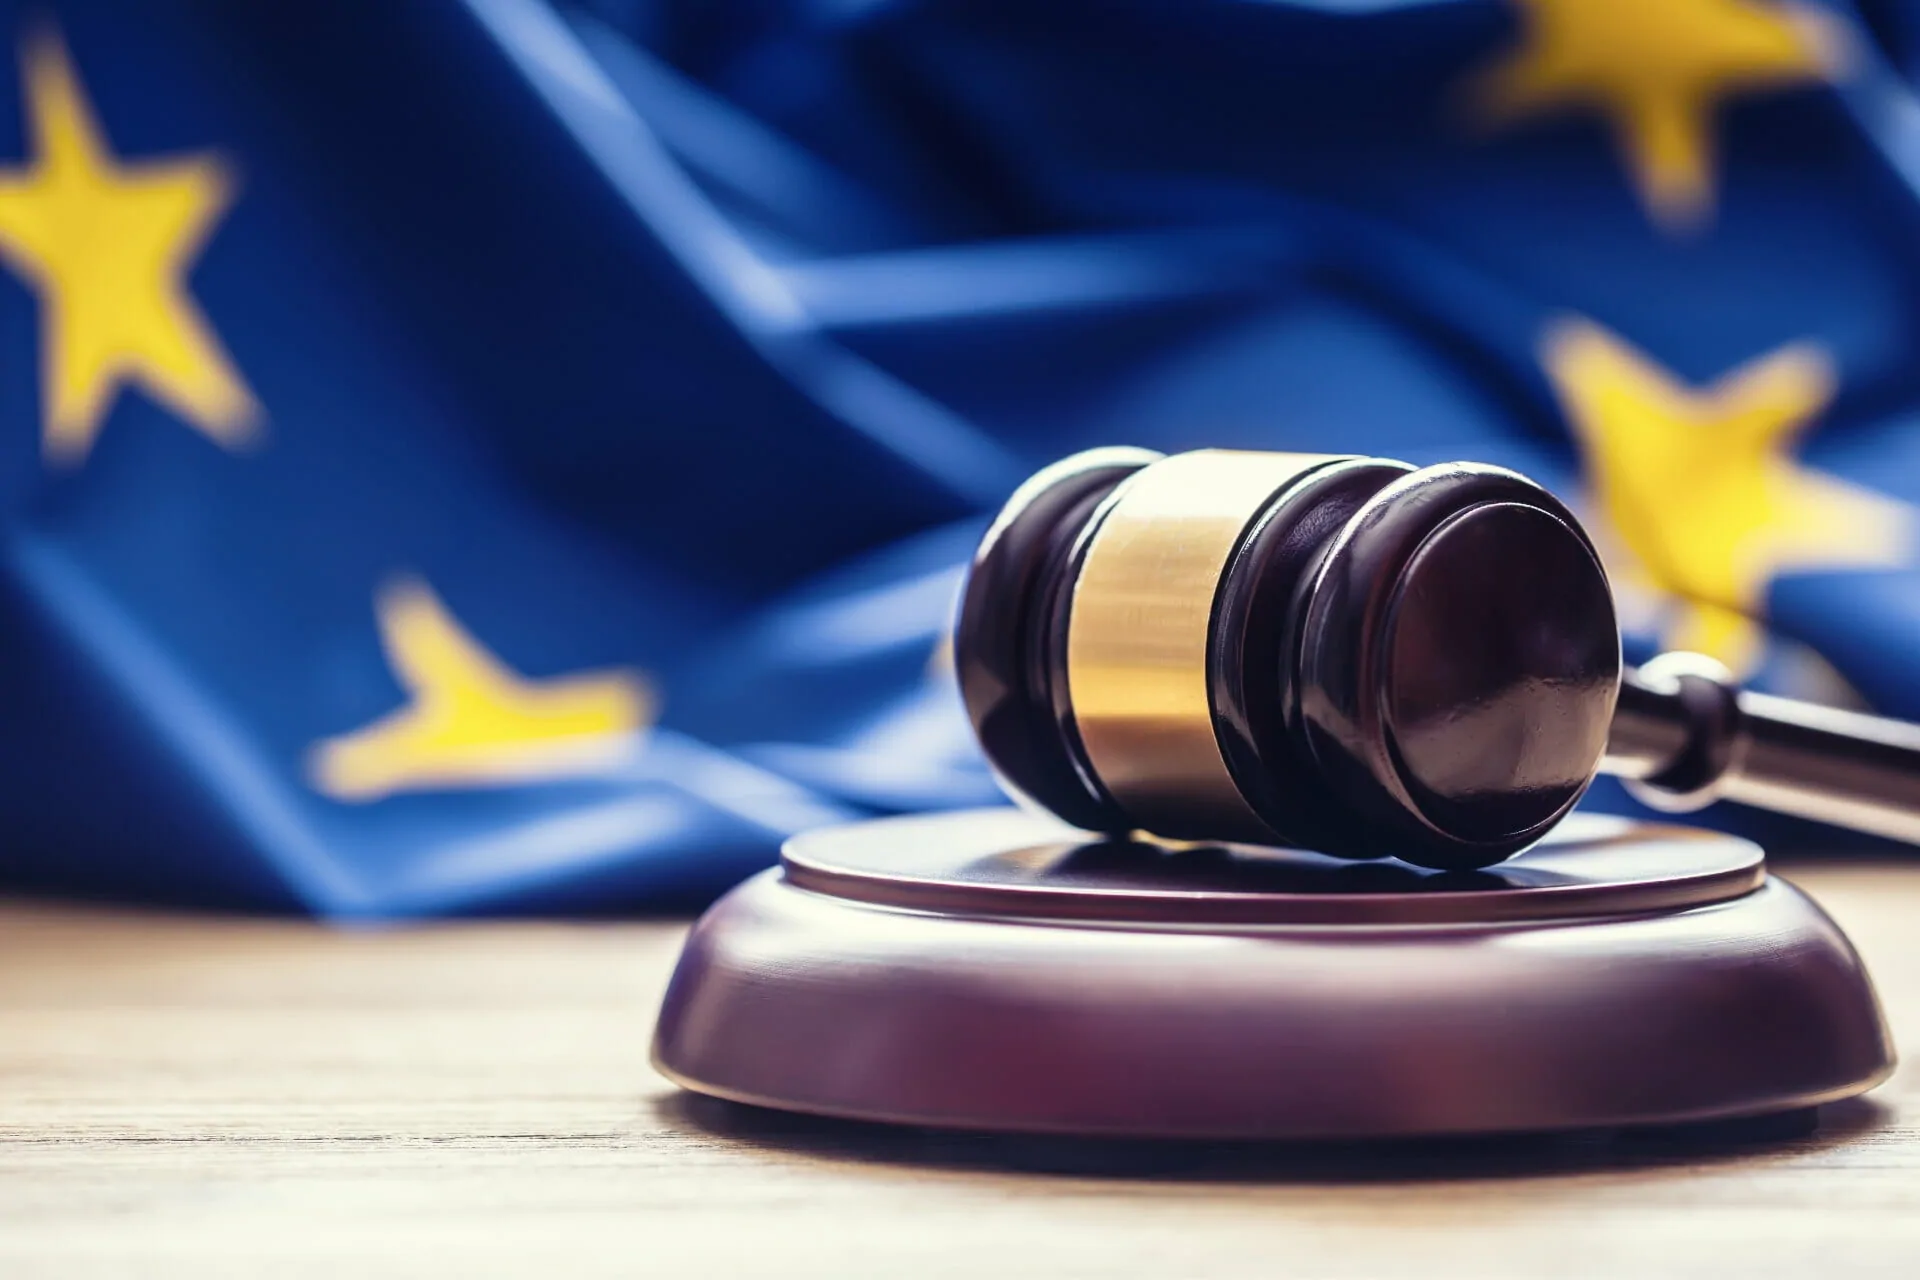 EU Court of Justice slams against abusive data collection